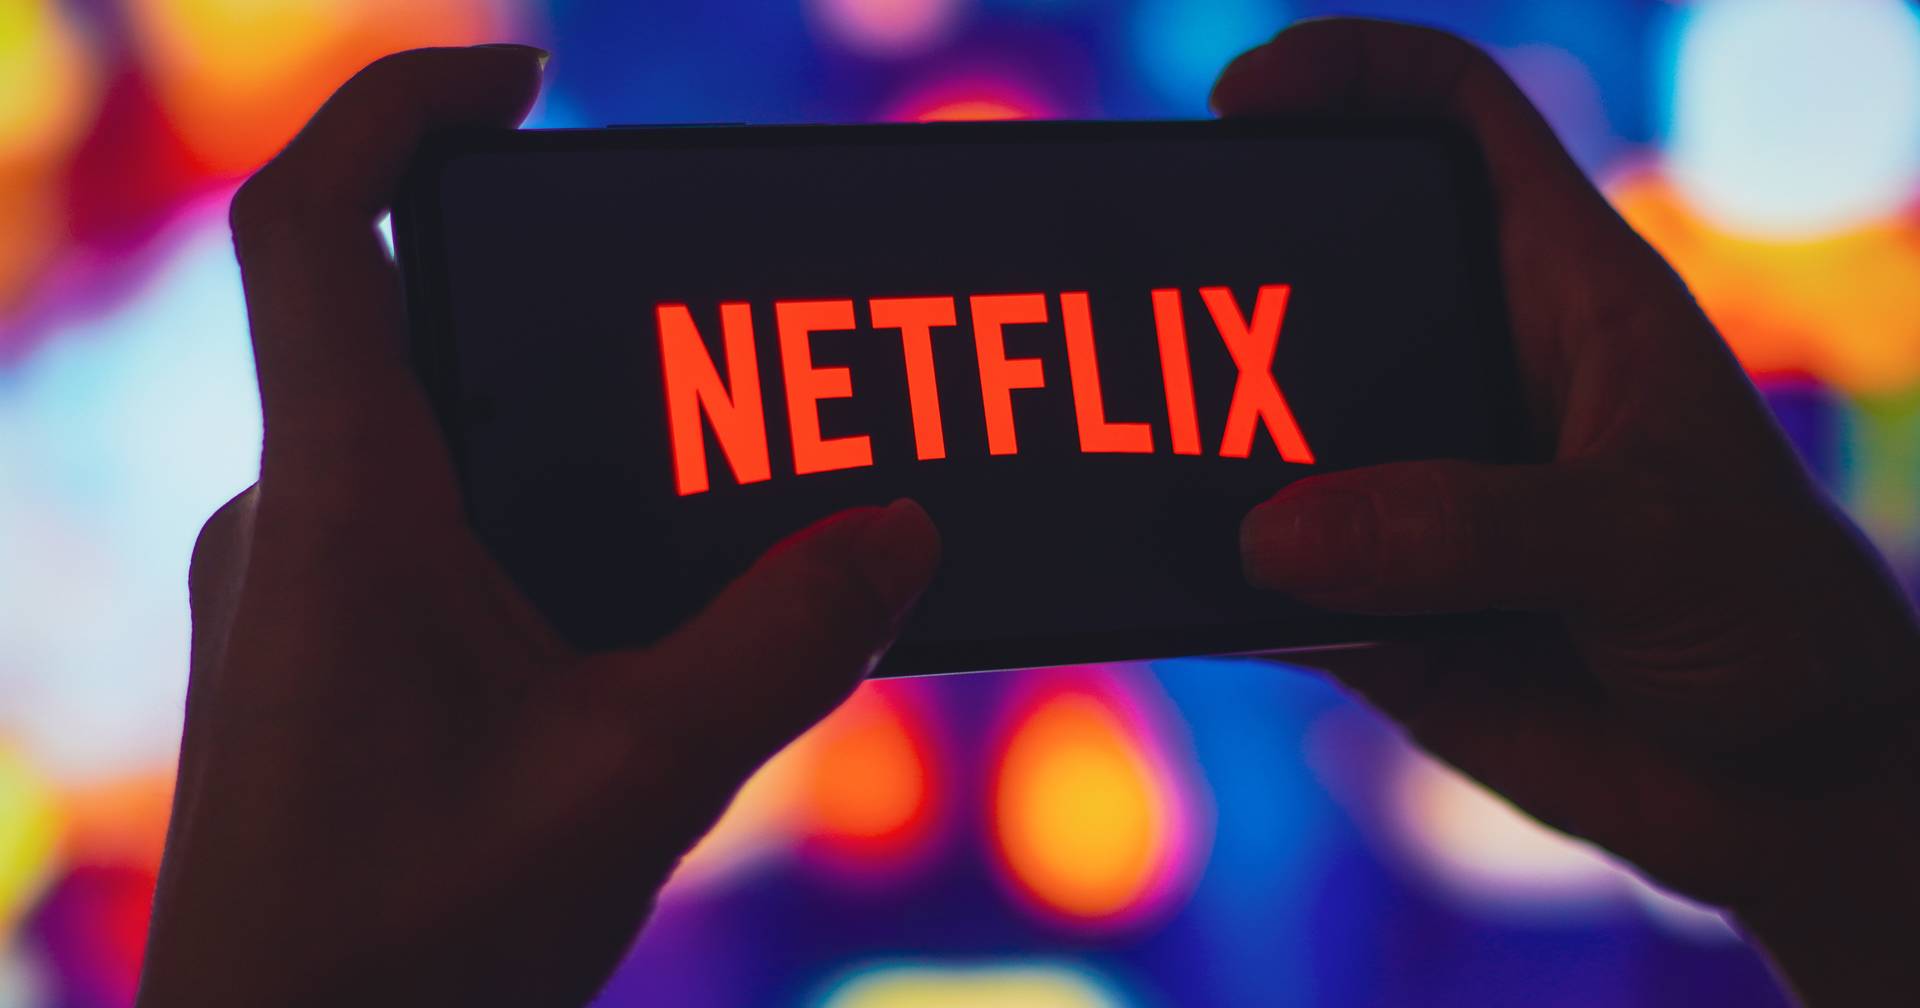 Did you know that Netflix has “hidden” series and movies?  Here are the secret codes